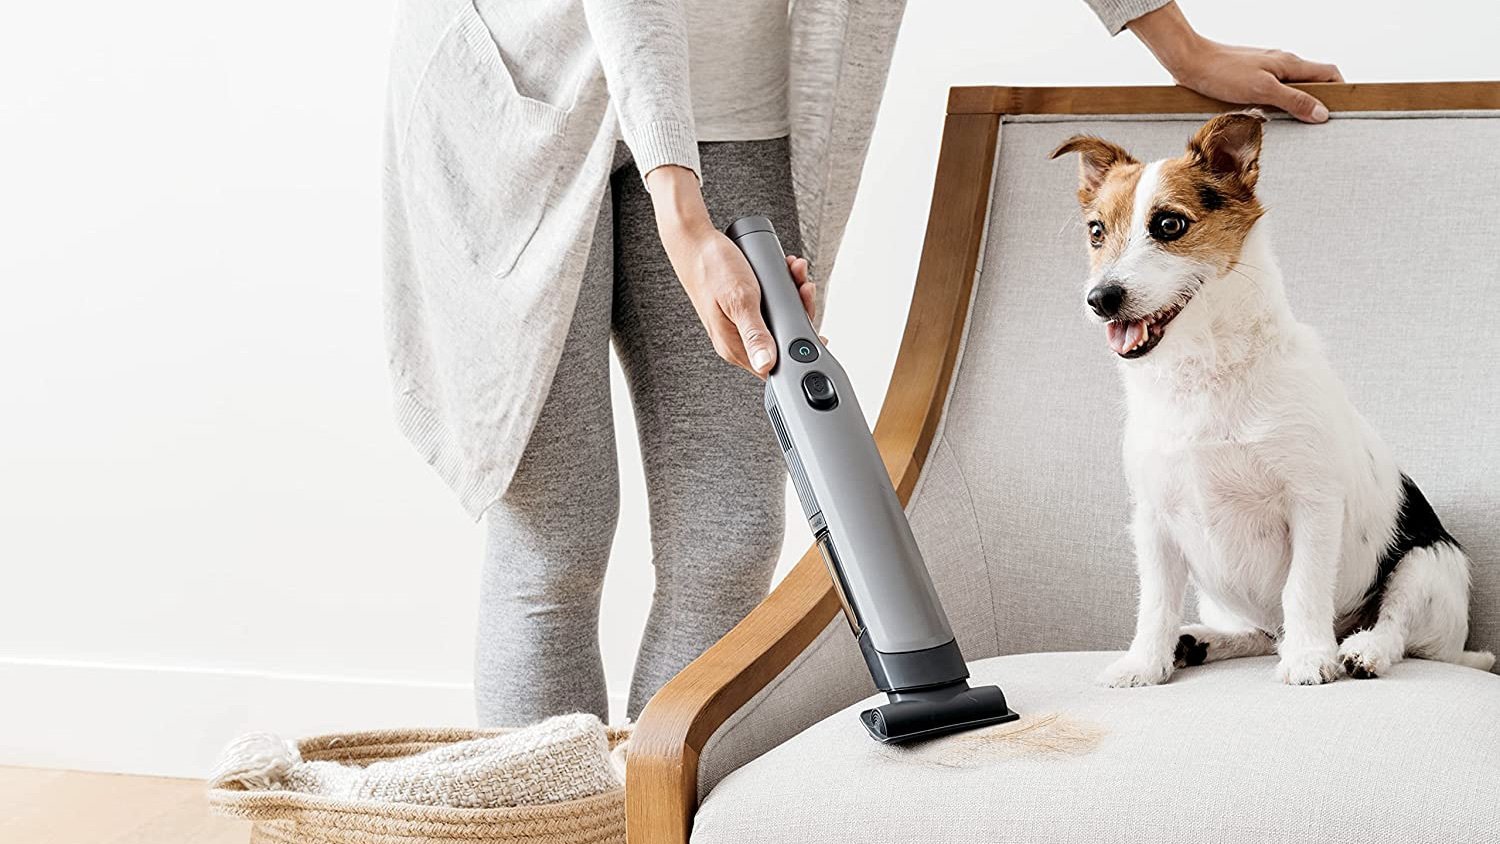 Banish fur from every crevice of your home with one of these capable handheld vacuums